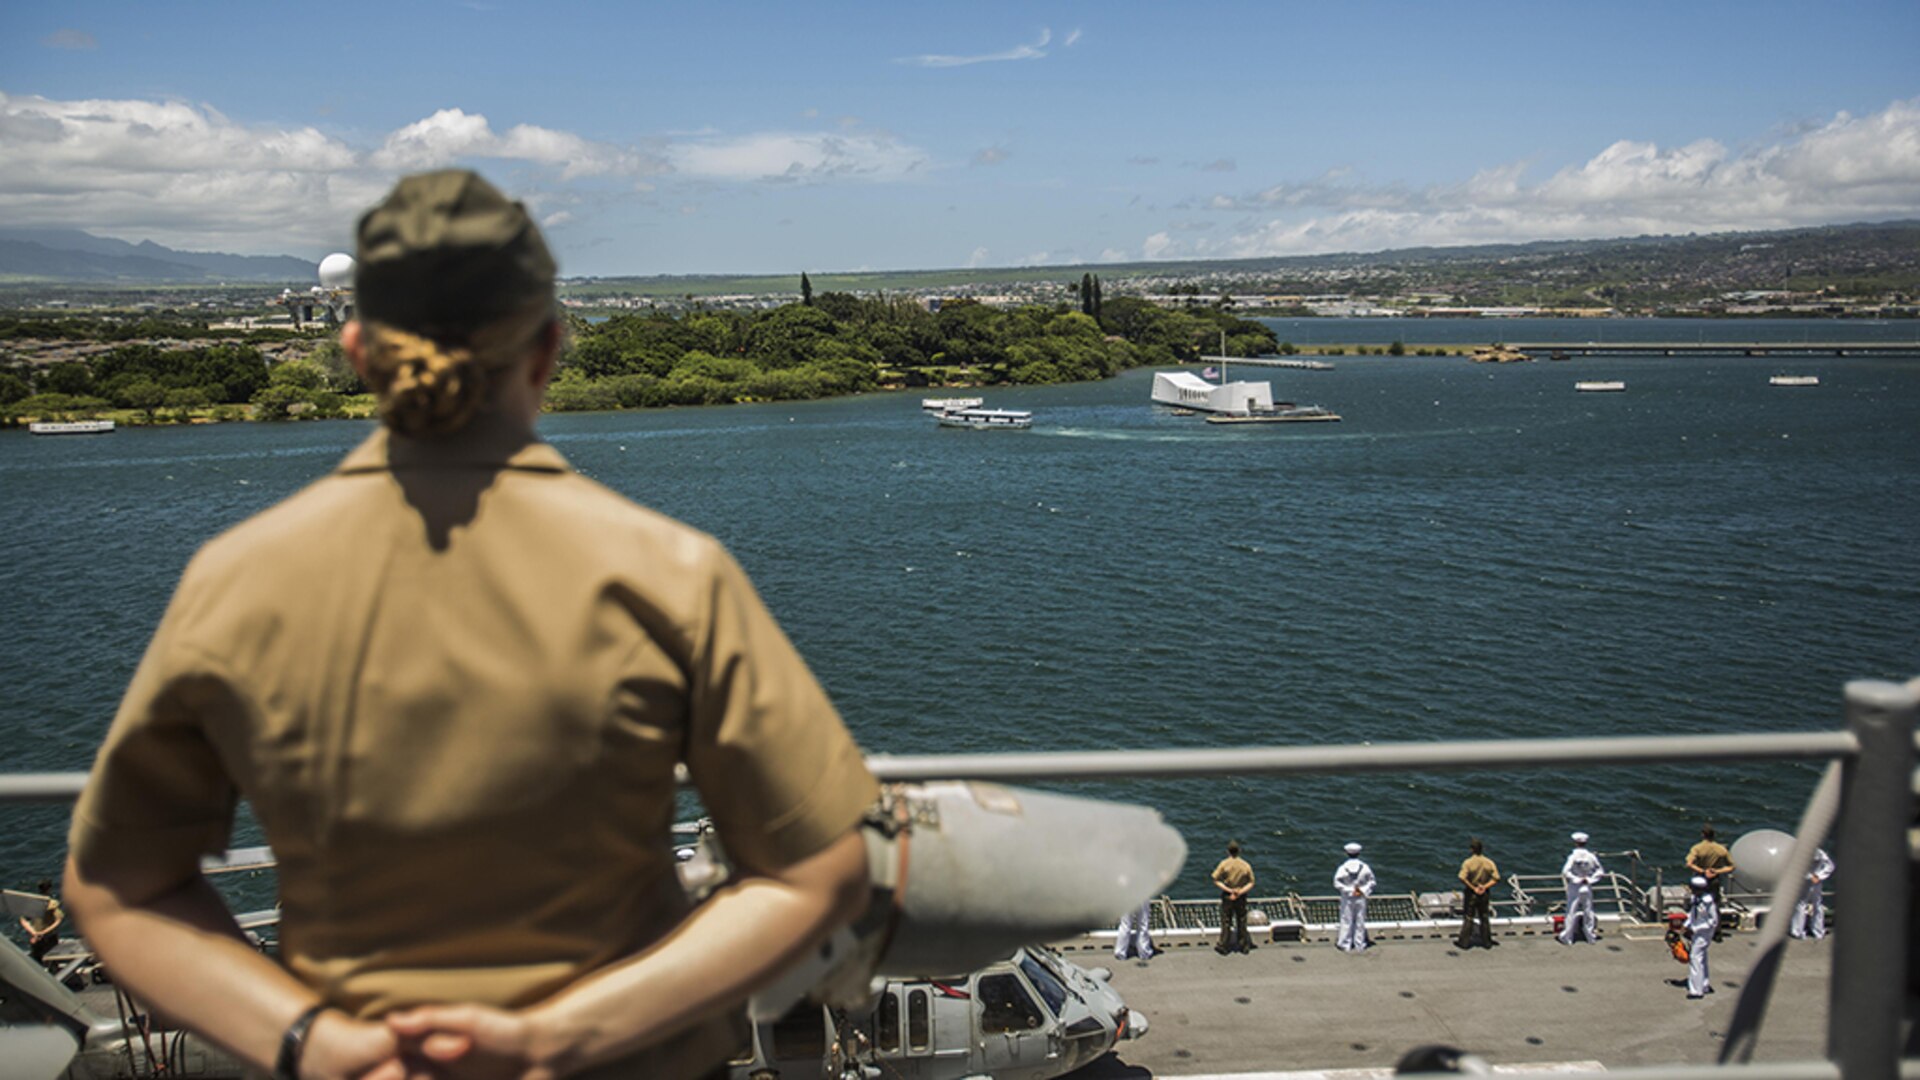 U.S. Marines and Sailors with the 13th Marine Expeditionary Unit and Boxer Amphibious Ready Group man the rails aboard the USS Boxer, Joint Base Pearl Harbor-Hickman Pier, August 29, 2016. The 13th MEU, embarked on the Boxer Amphibious Ready Group, is operating in the U.S. 3rd Fleet area of operations in support of security and stability in the Pacific region. 